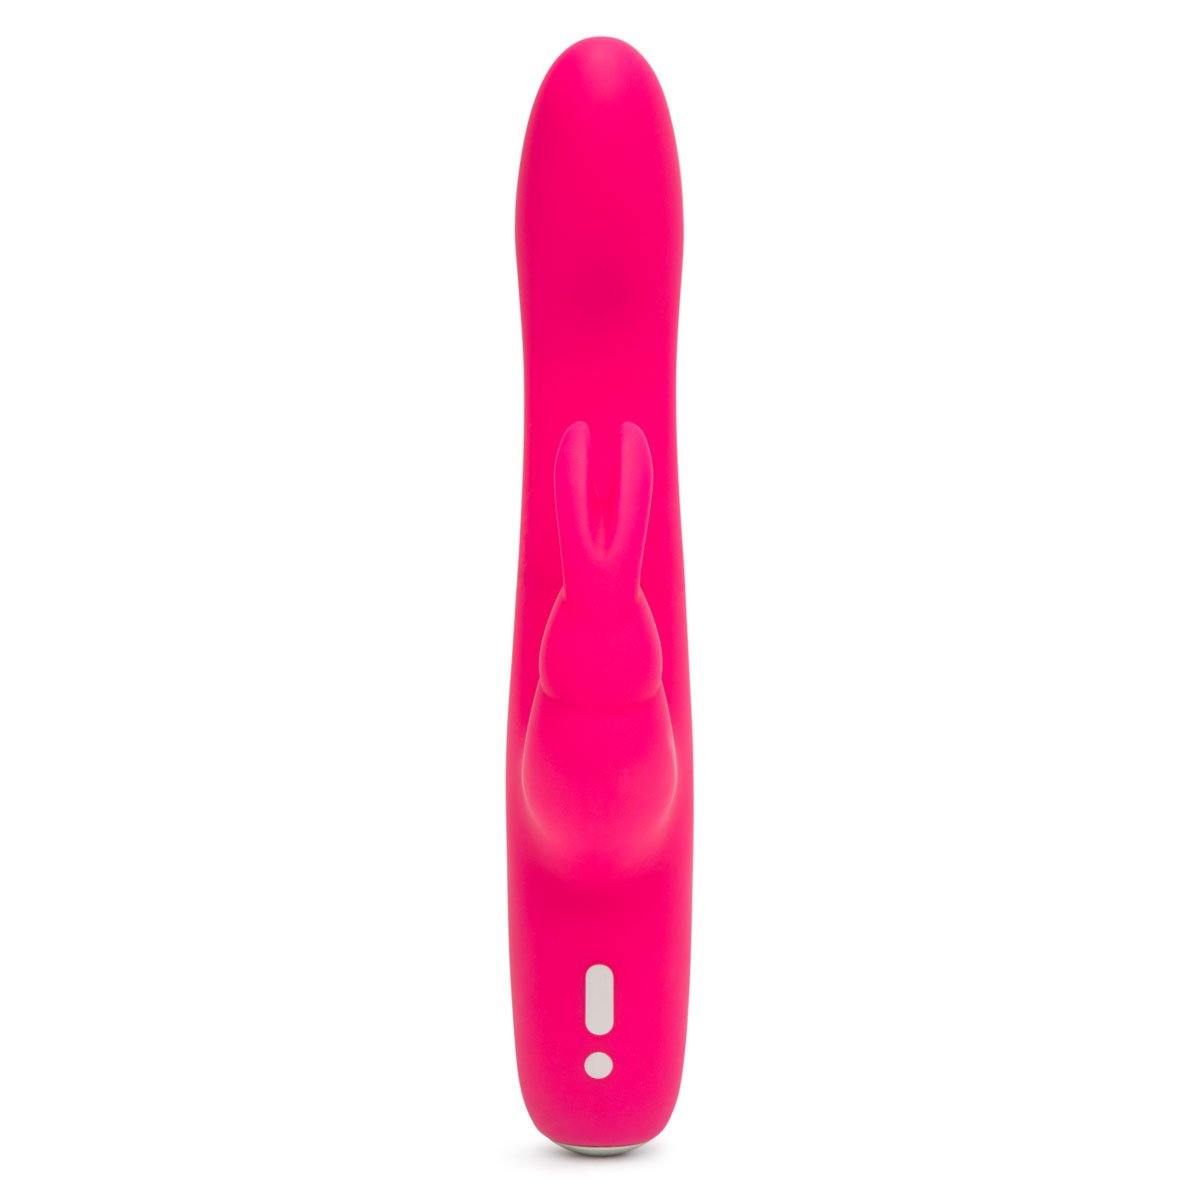 Happy Rabbit Slimline Curve Pink - Buy At Luxury Toy X - Free 3-Day Shipping